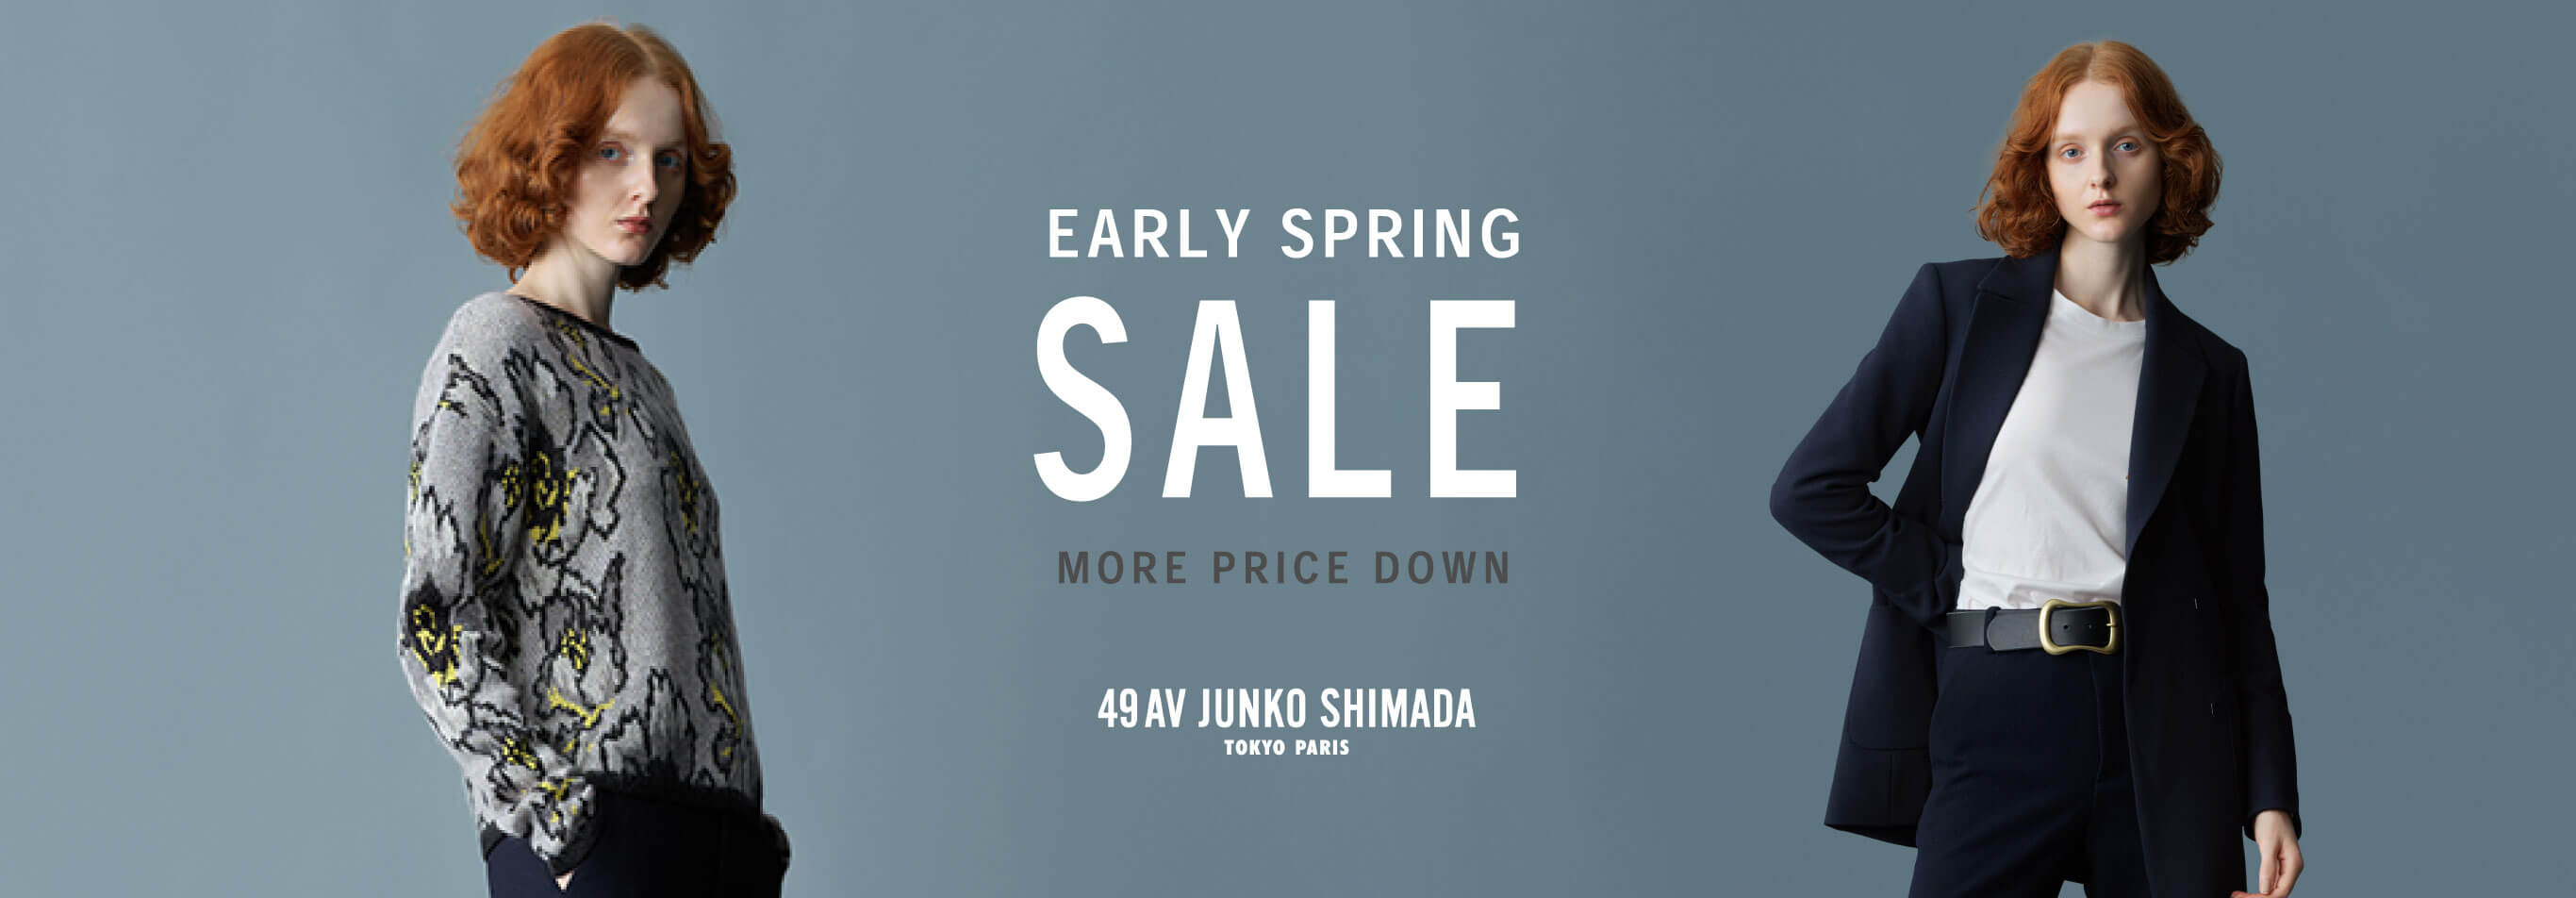 EARLY SPRING SALE